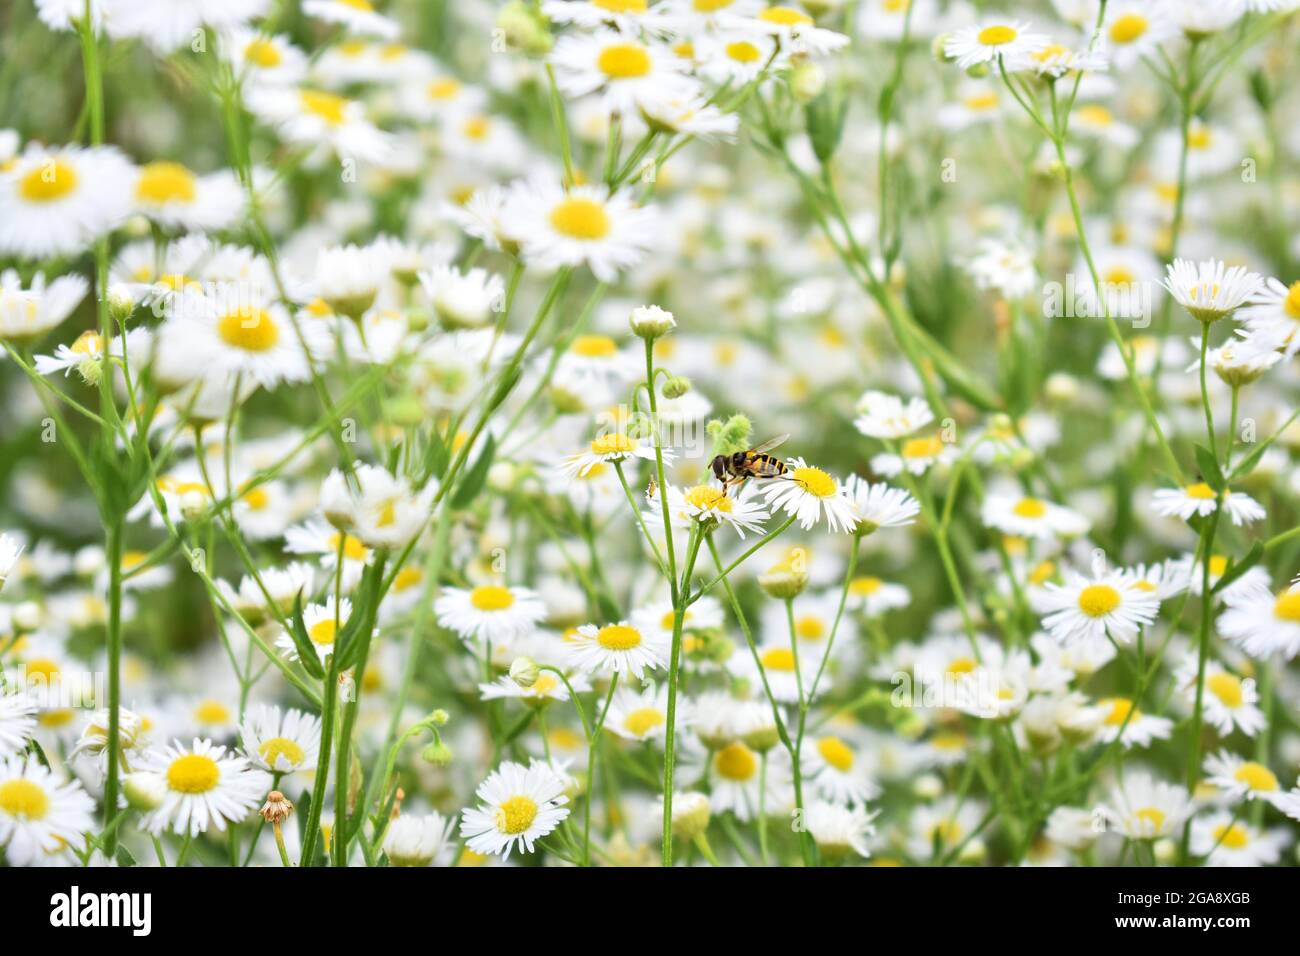 Bee mimic fly in a field of white daisy fleabane (Erigeron annuus) flowers Stock Photo